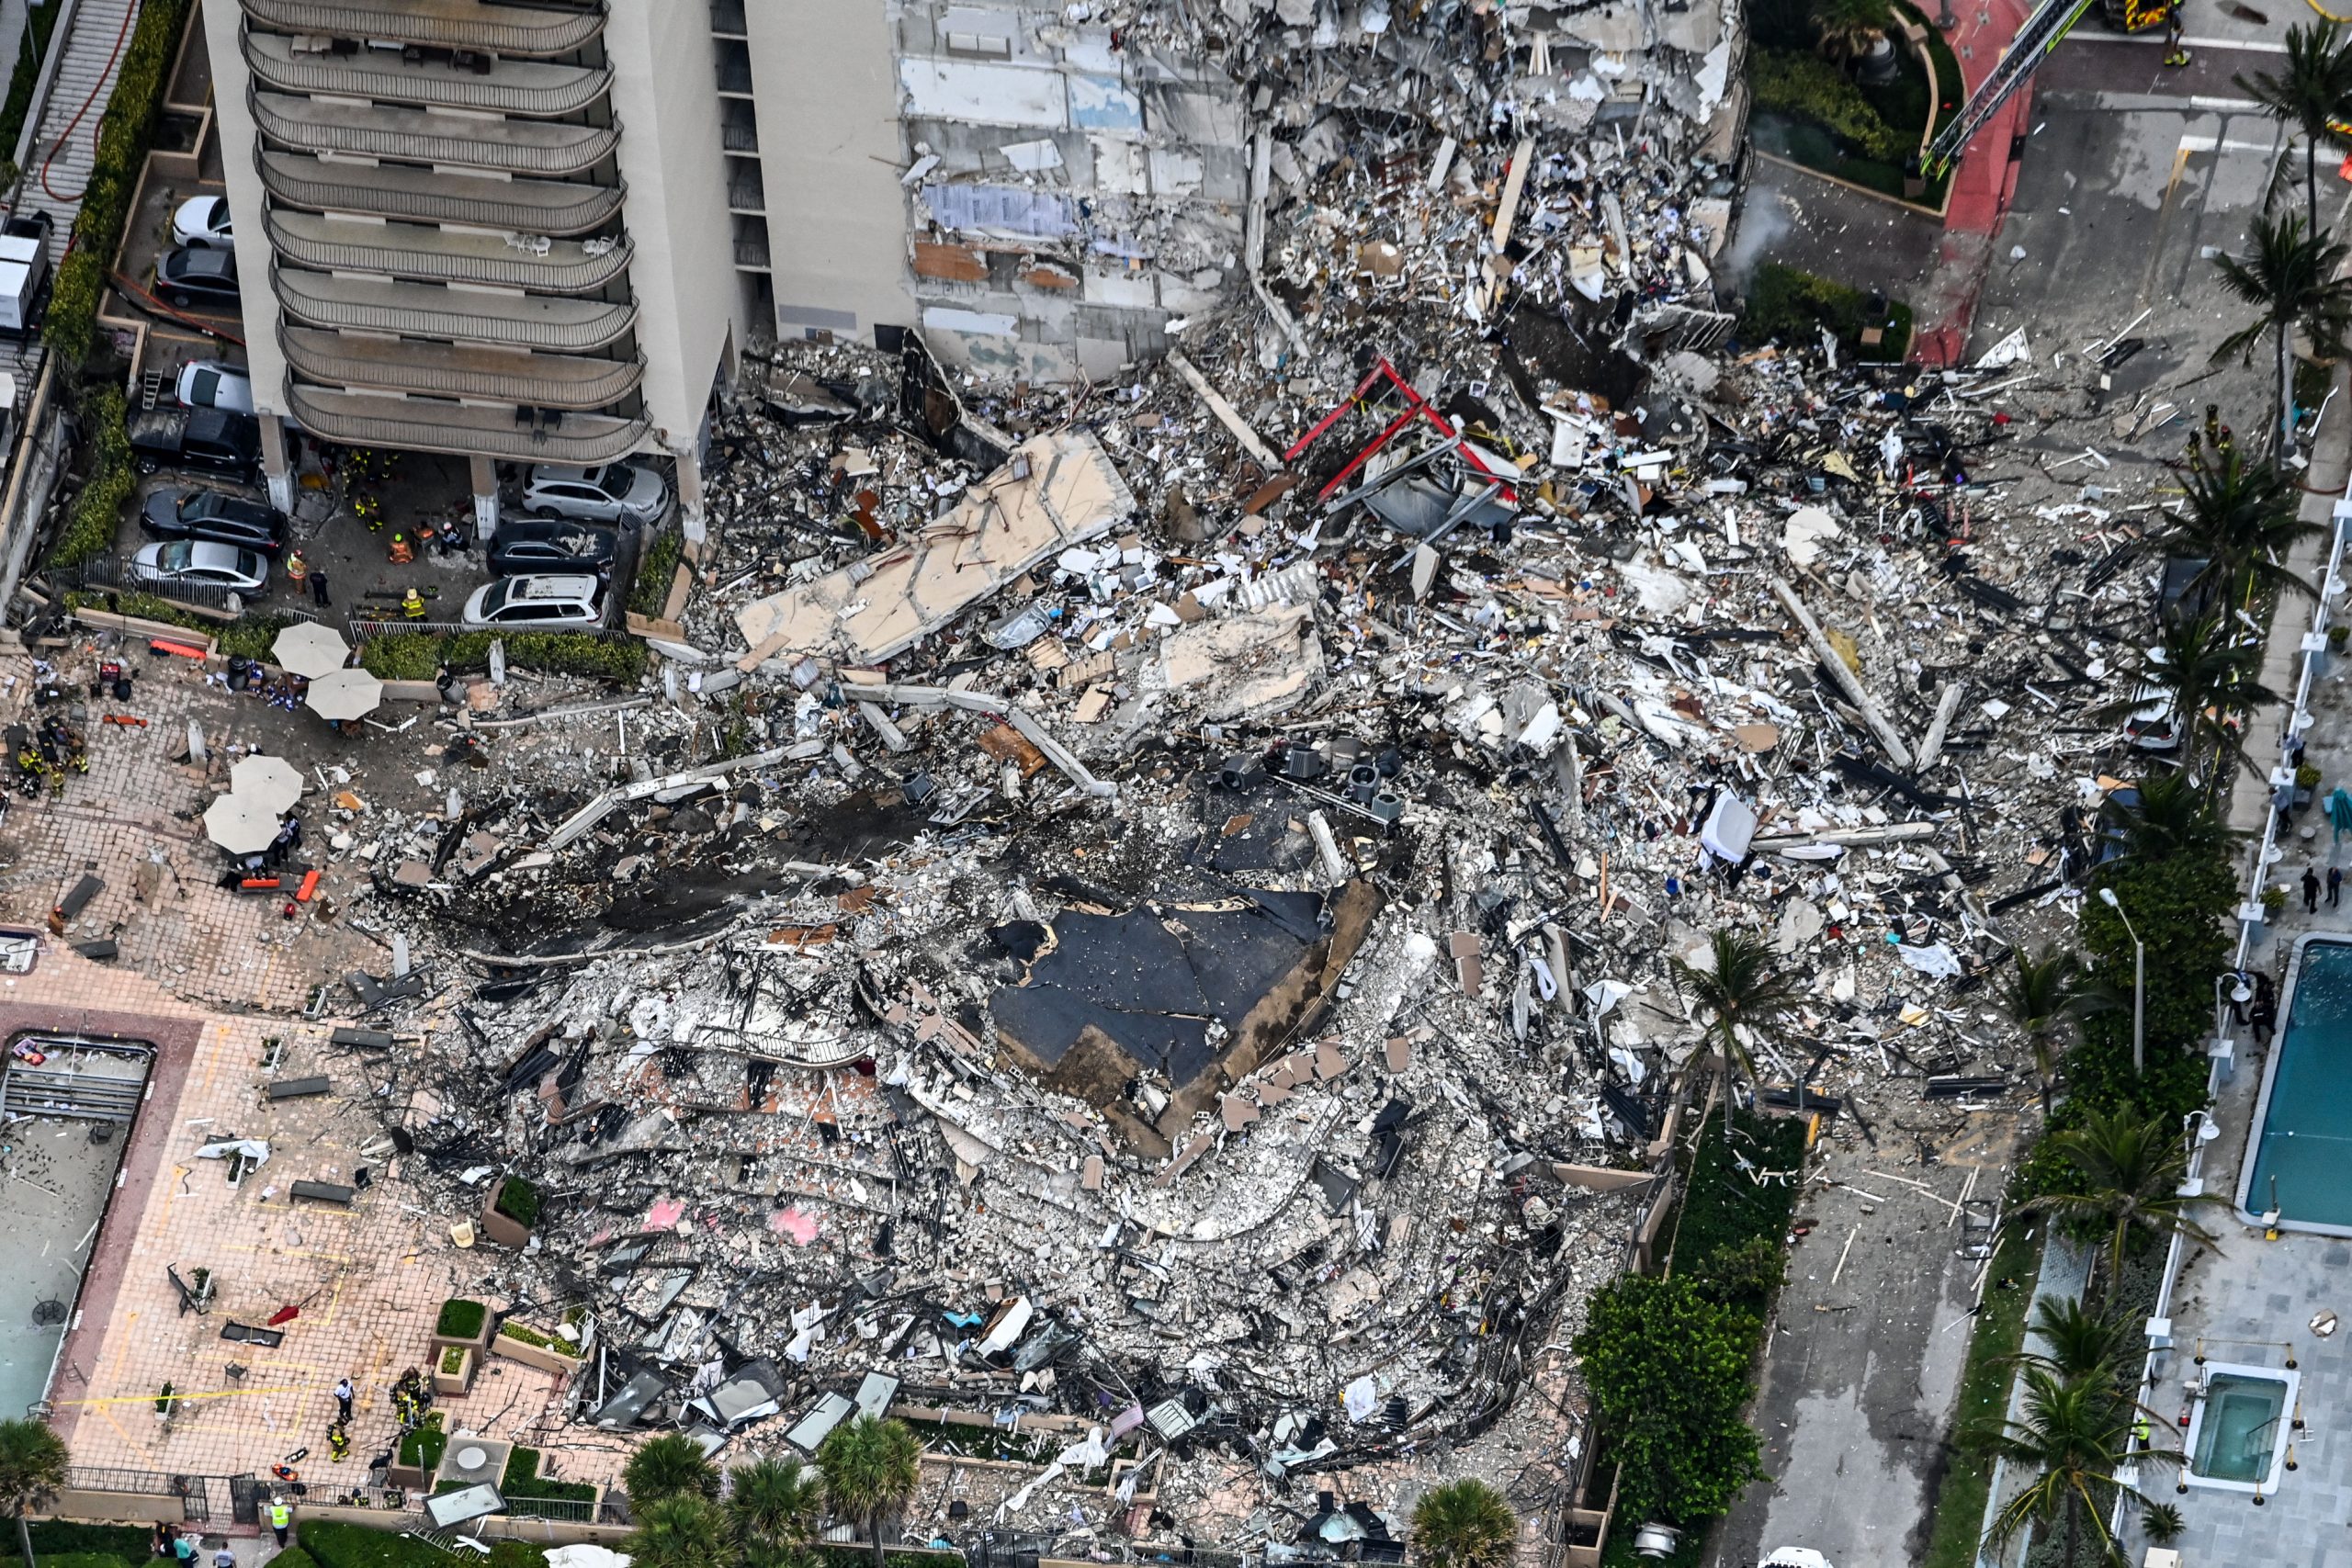 Florida’s collapsed building showed signs of sinking, says researcher